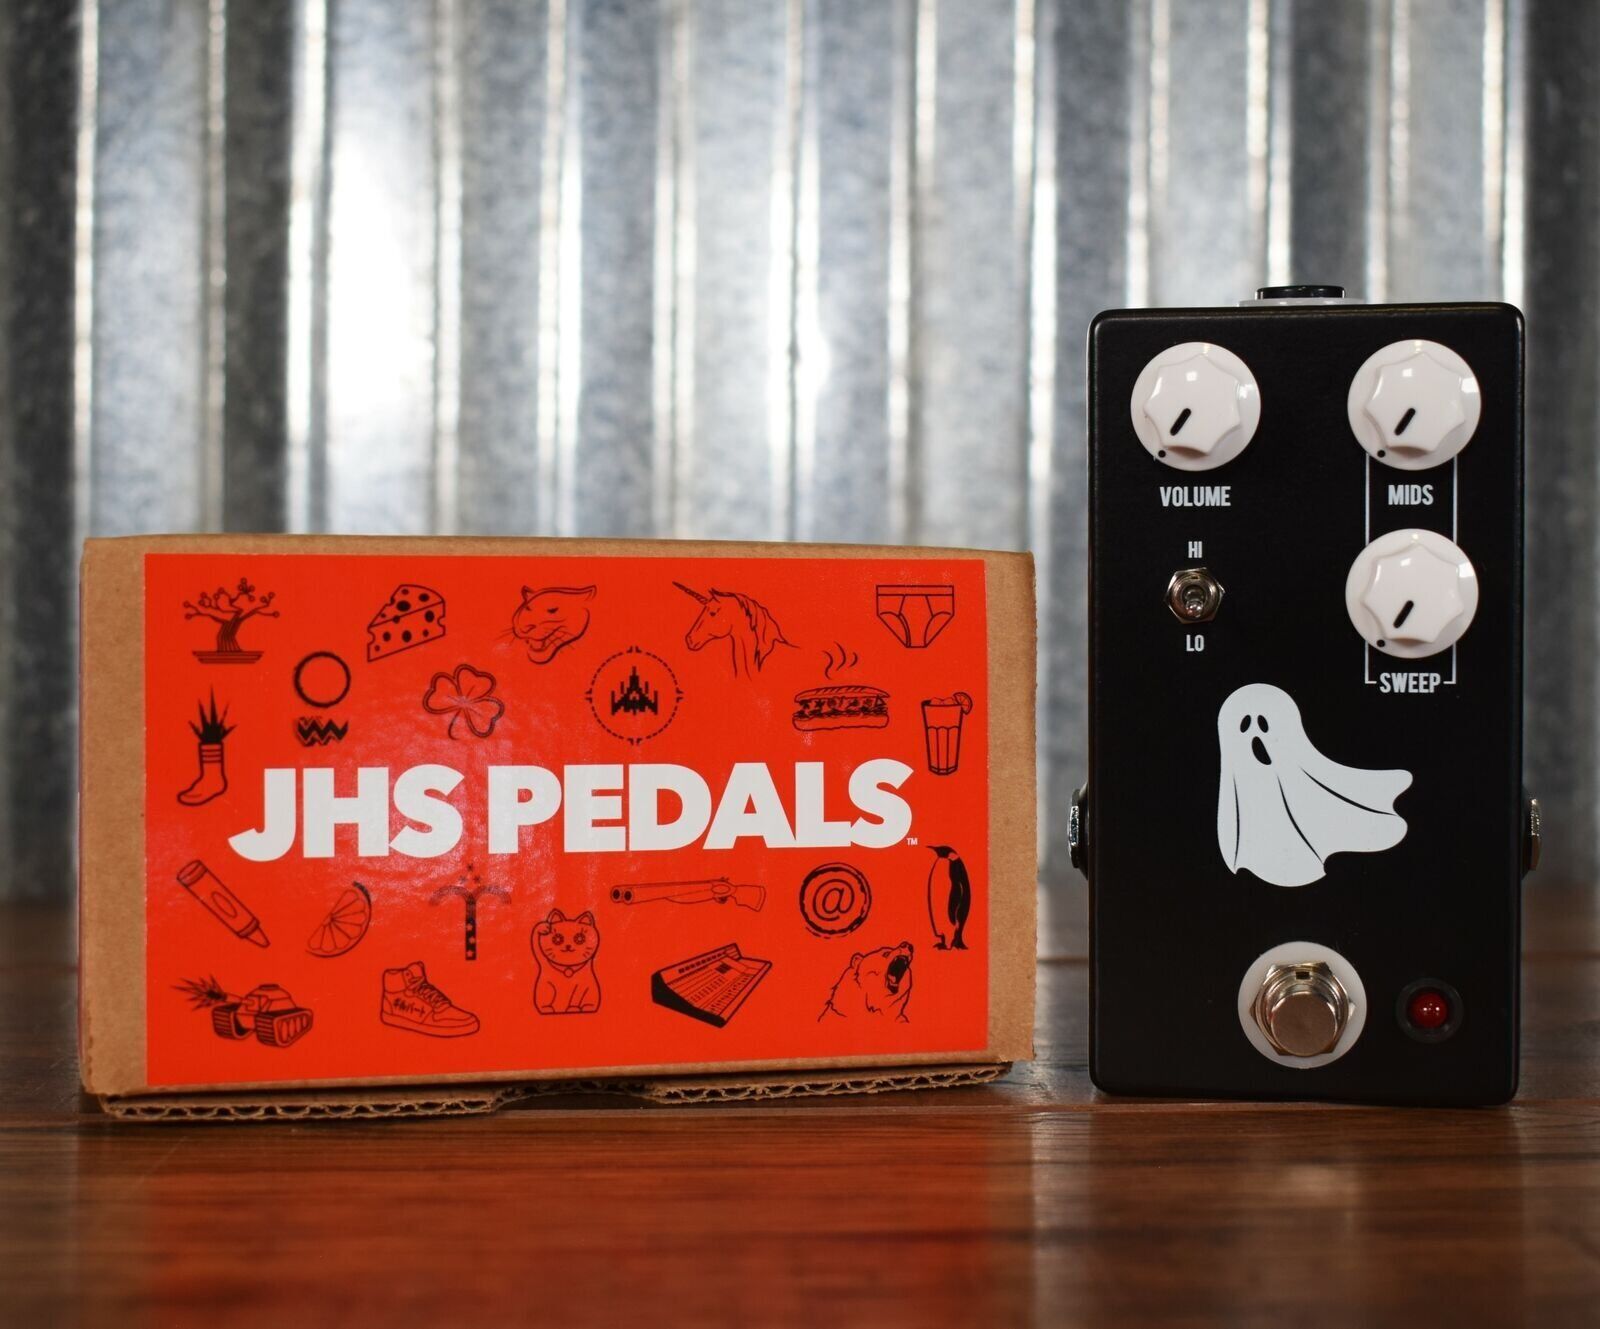 JHS Pedals Haunting Mids EQ Preamp Guitar Effect Pedal | eBay